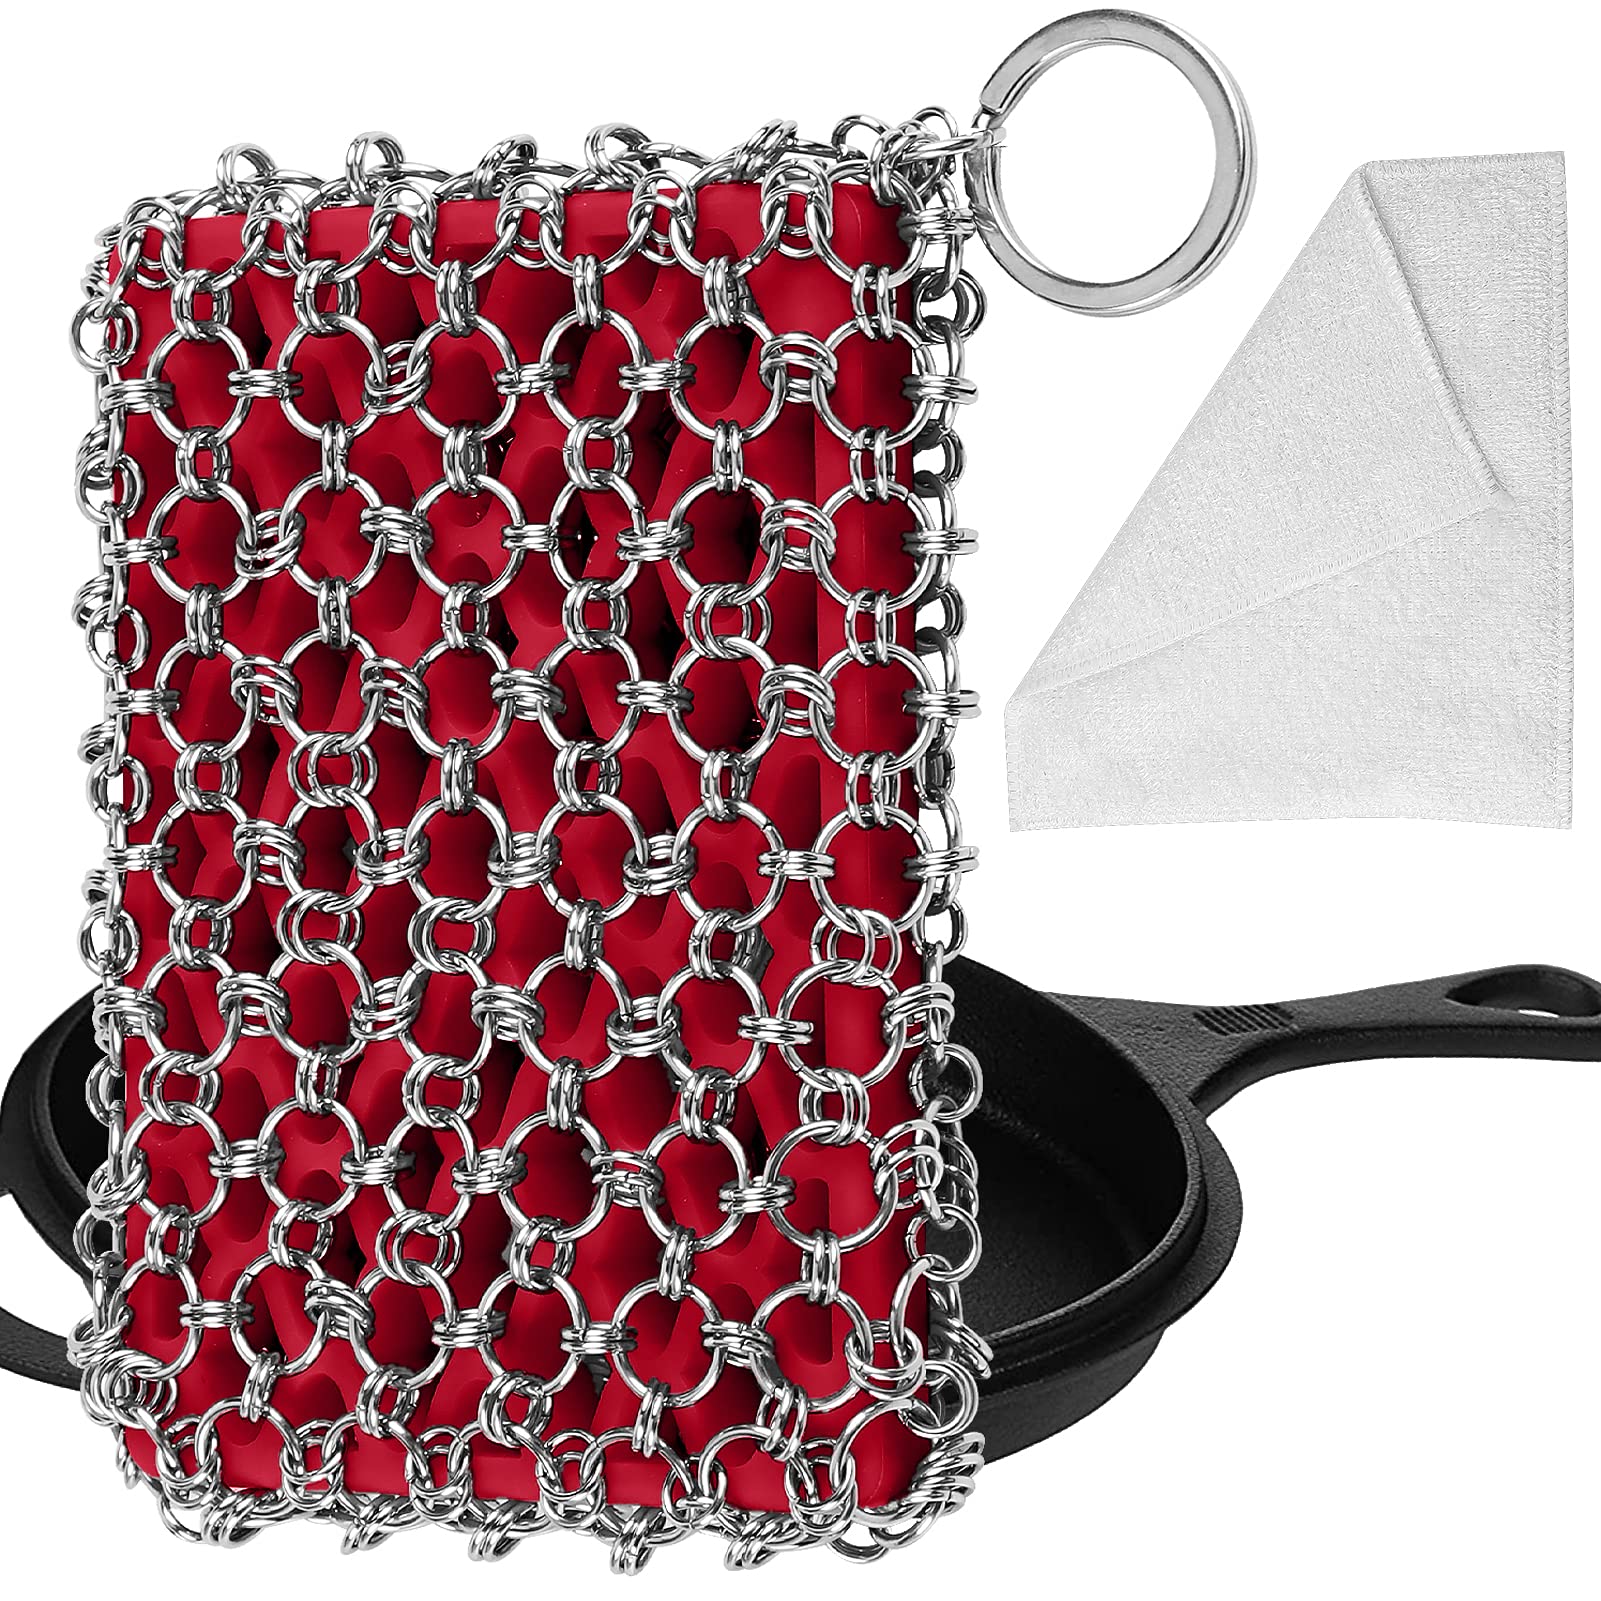 Herda Cast Iron Skillet Cleaner Scrubber, Upgraded Chainmail